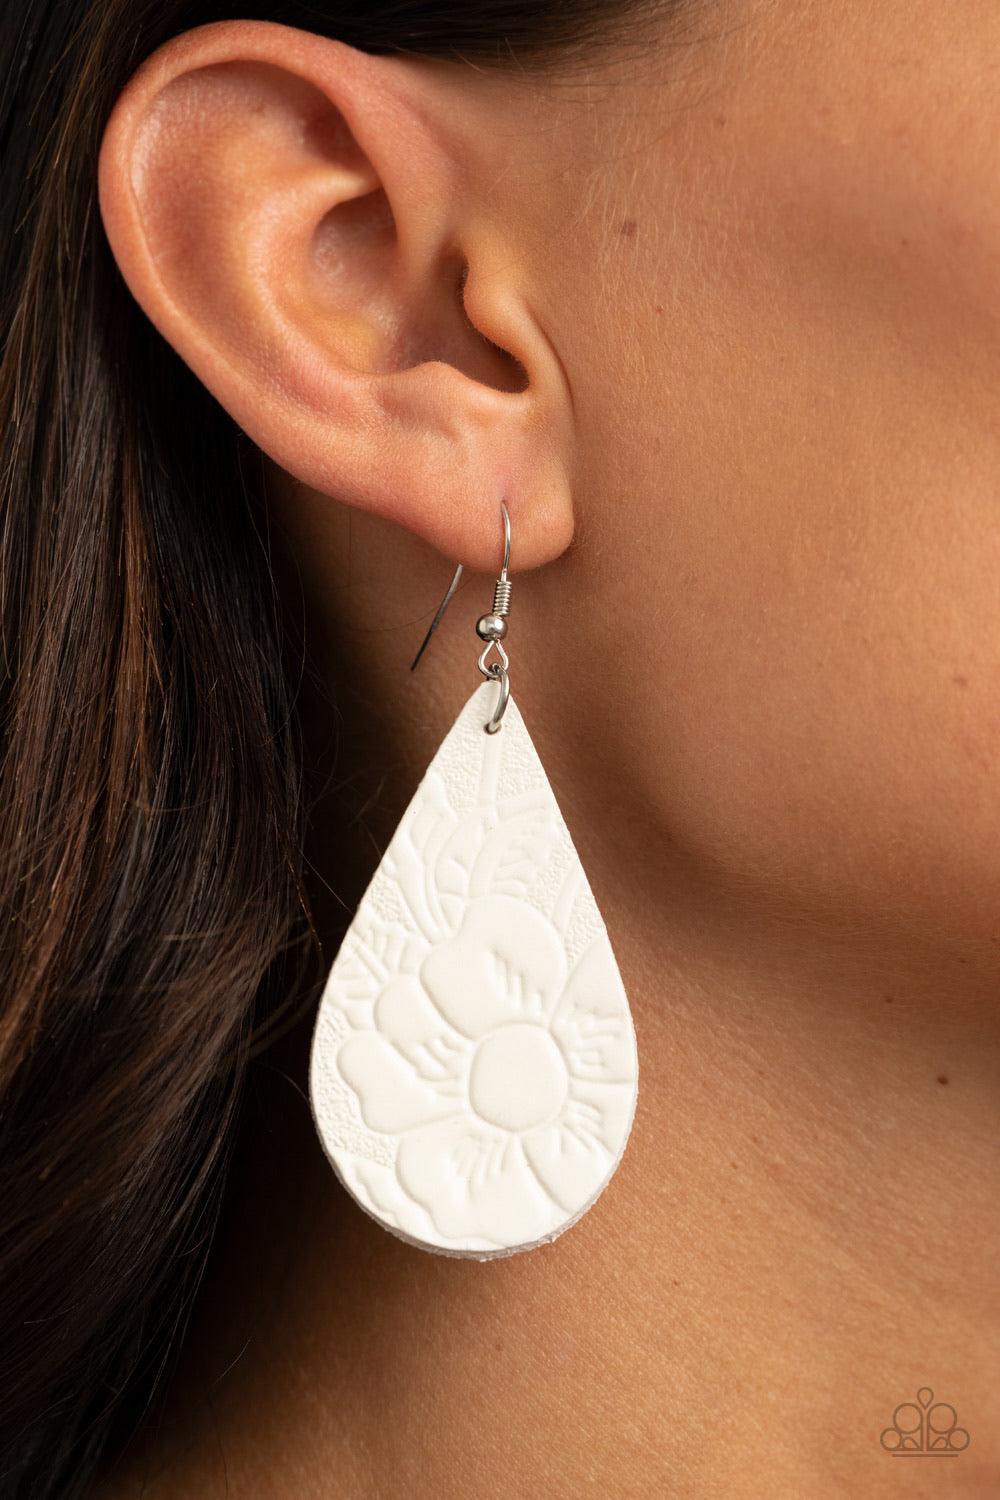 Paparazzi Accessories Beach Garden - White Embossed in a leafy floral pattern, an earthy white leather teardrop swings from the ear for a whimsical look. Earring attaches to a standard fishhook fitting. Sold as one pair of earrings. Jewelry